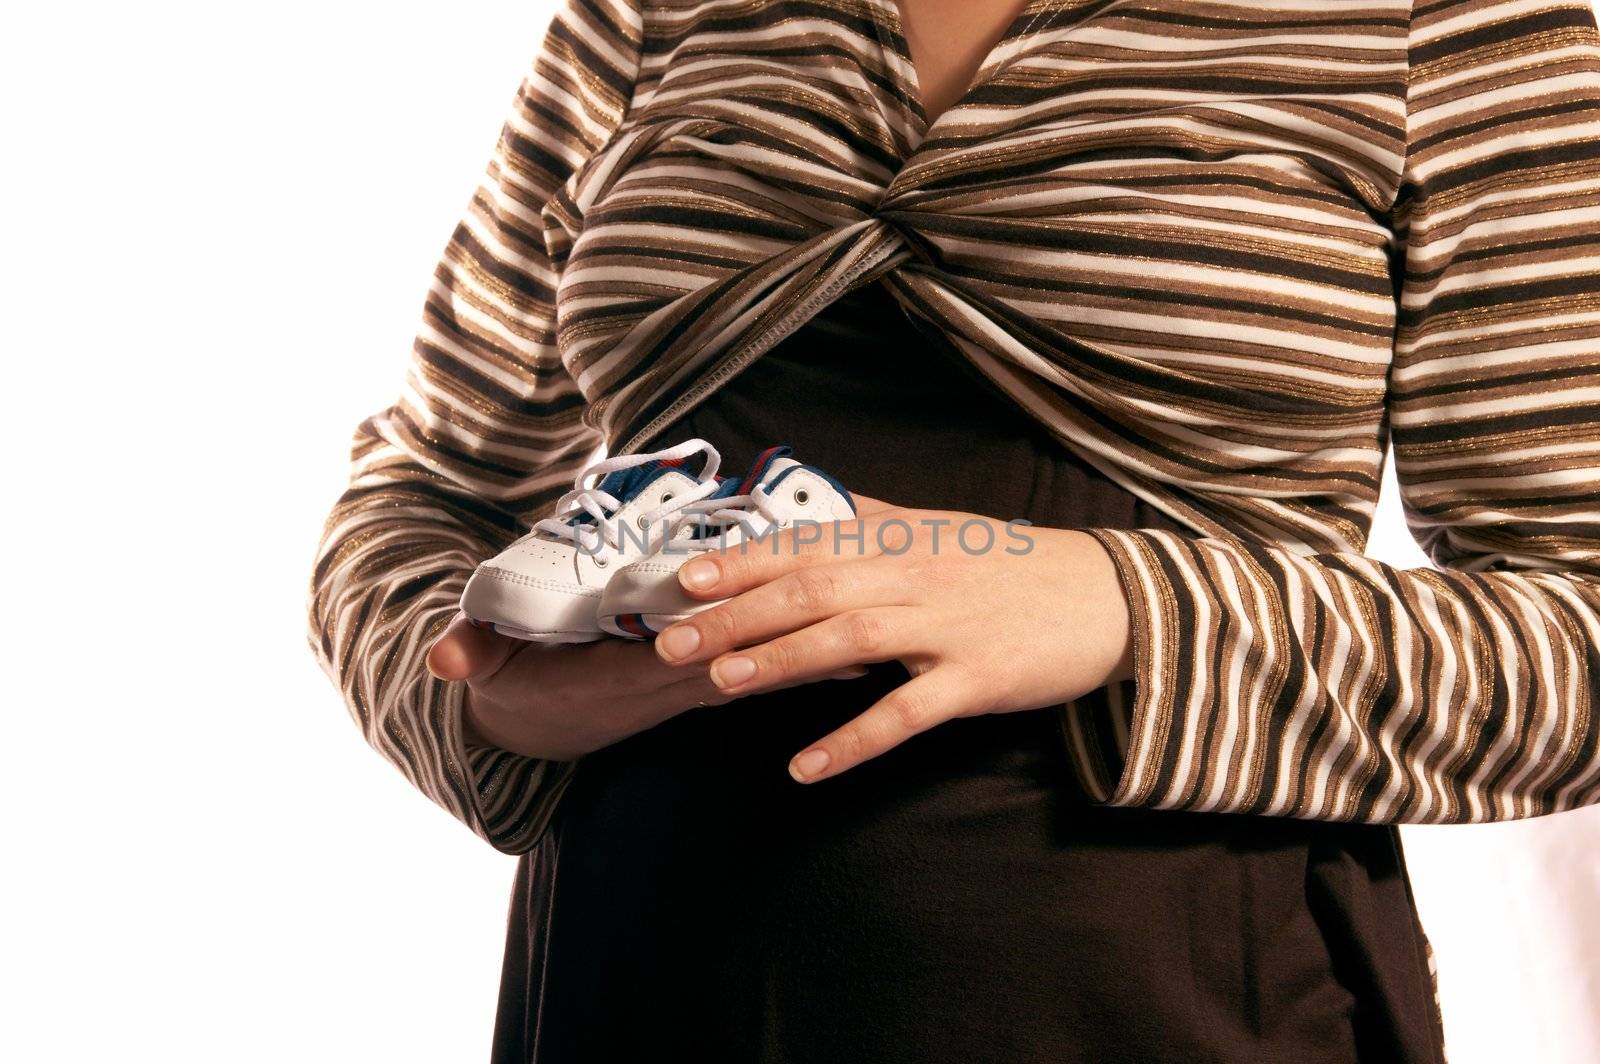 The pregnant woman on a white background. In hands holds small boots